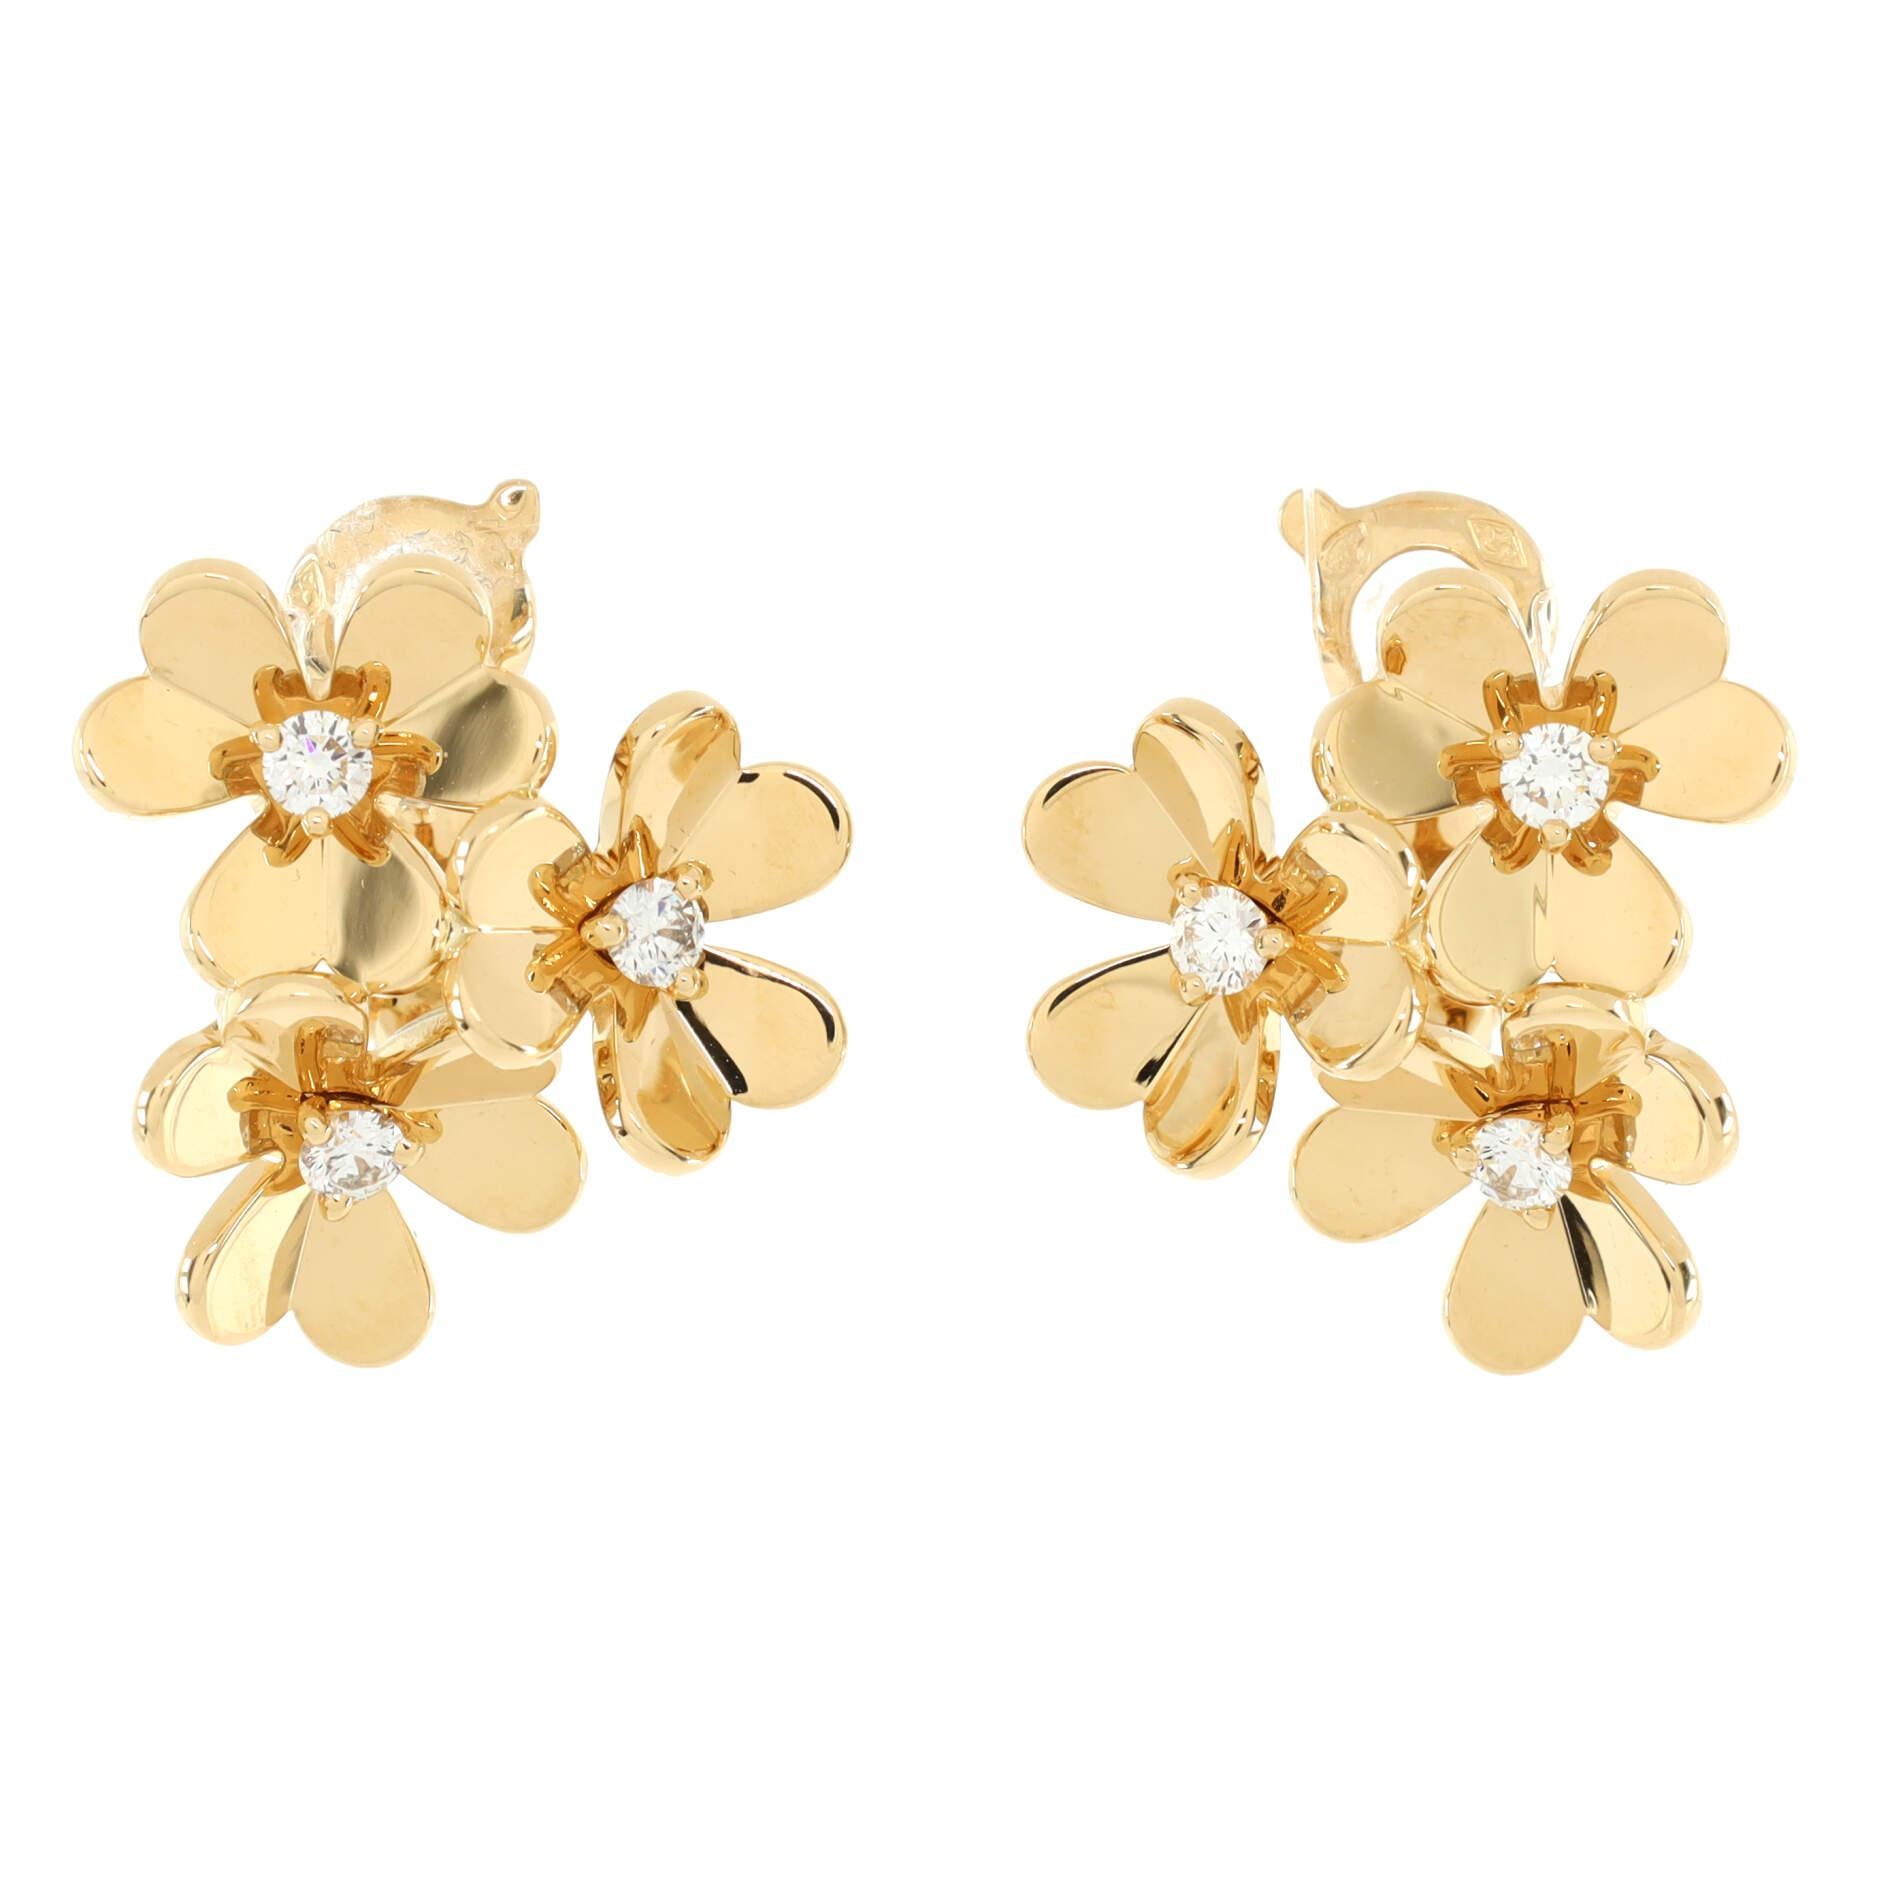 Condition: Excellent. Faint wear throughout.
Accessories: No Accessories
Measurements: Height/Length: 19.10 mm, Width: 17.90 mm
Designer: Van Cleef & Arpels
Model: Frivole 3 Motif Stud Earrings 18K Yellow Gold with Diamonds Mini
Exterior Color: